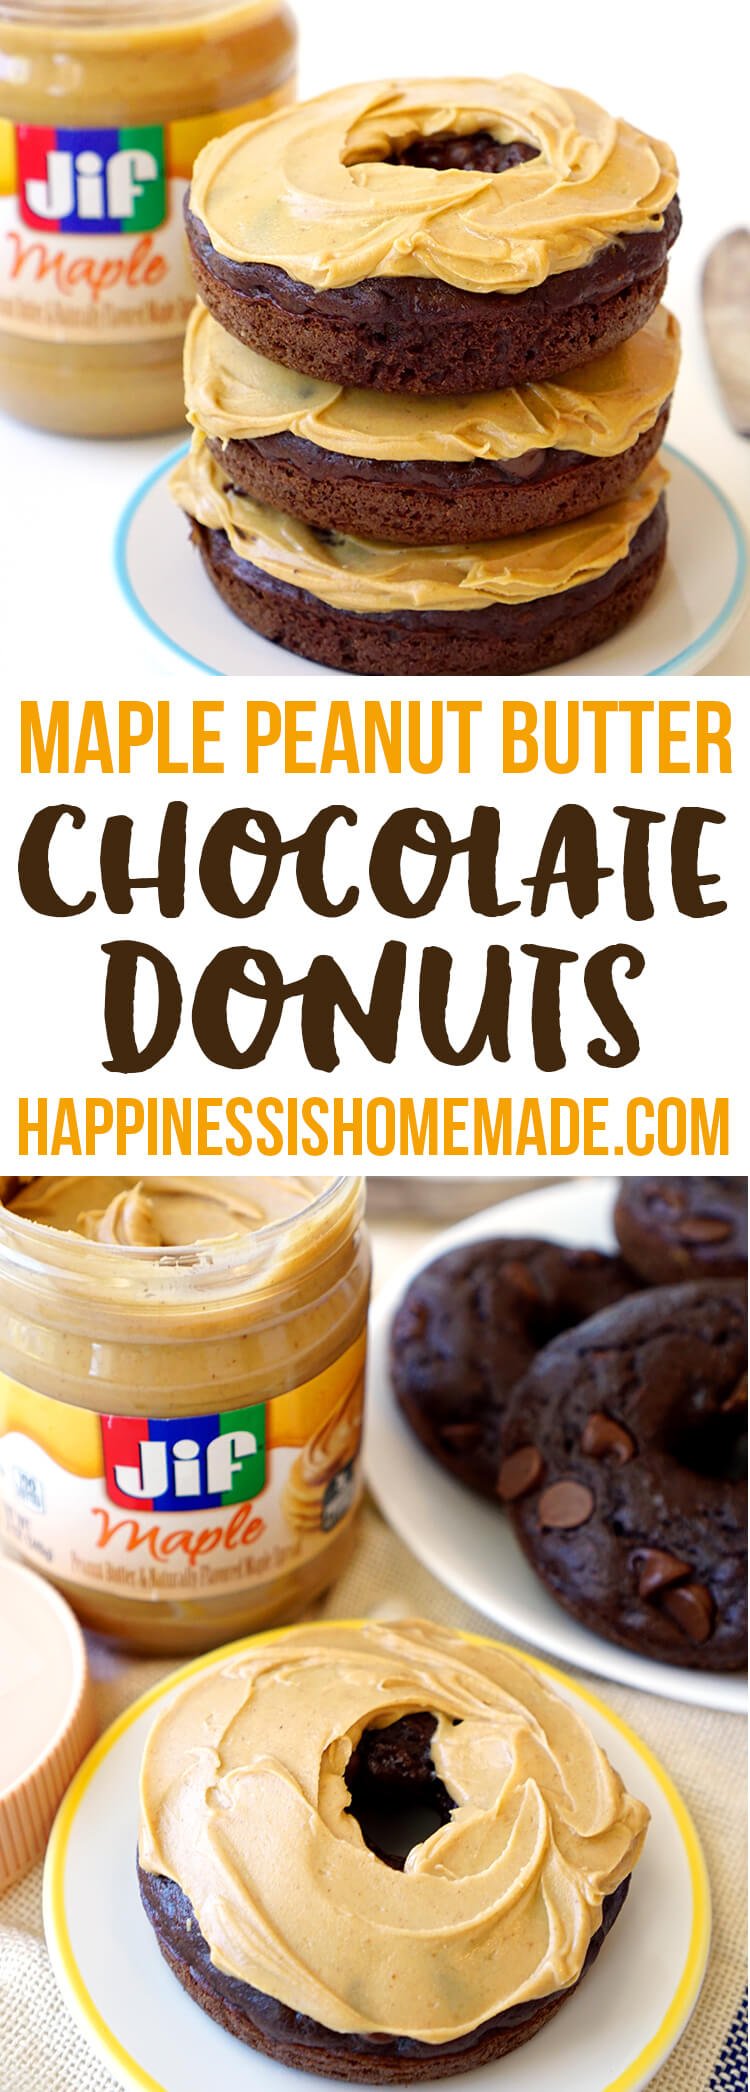 Maple Peanut Butter Double Chocolate Donuts